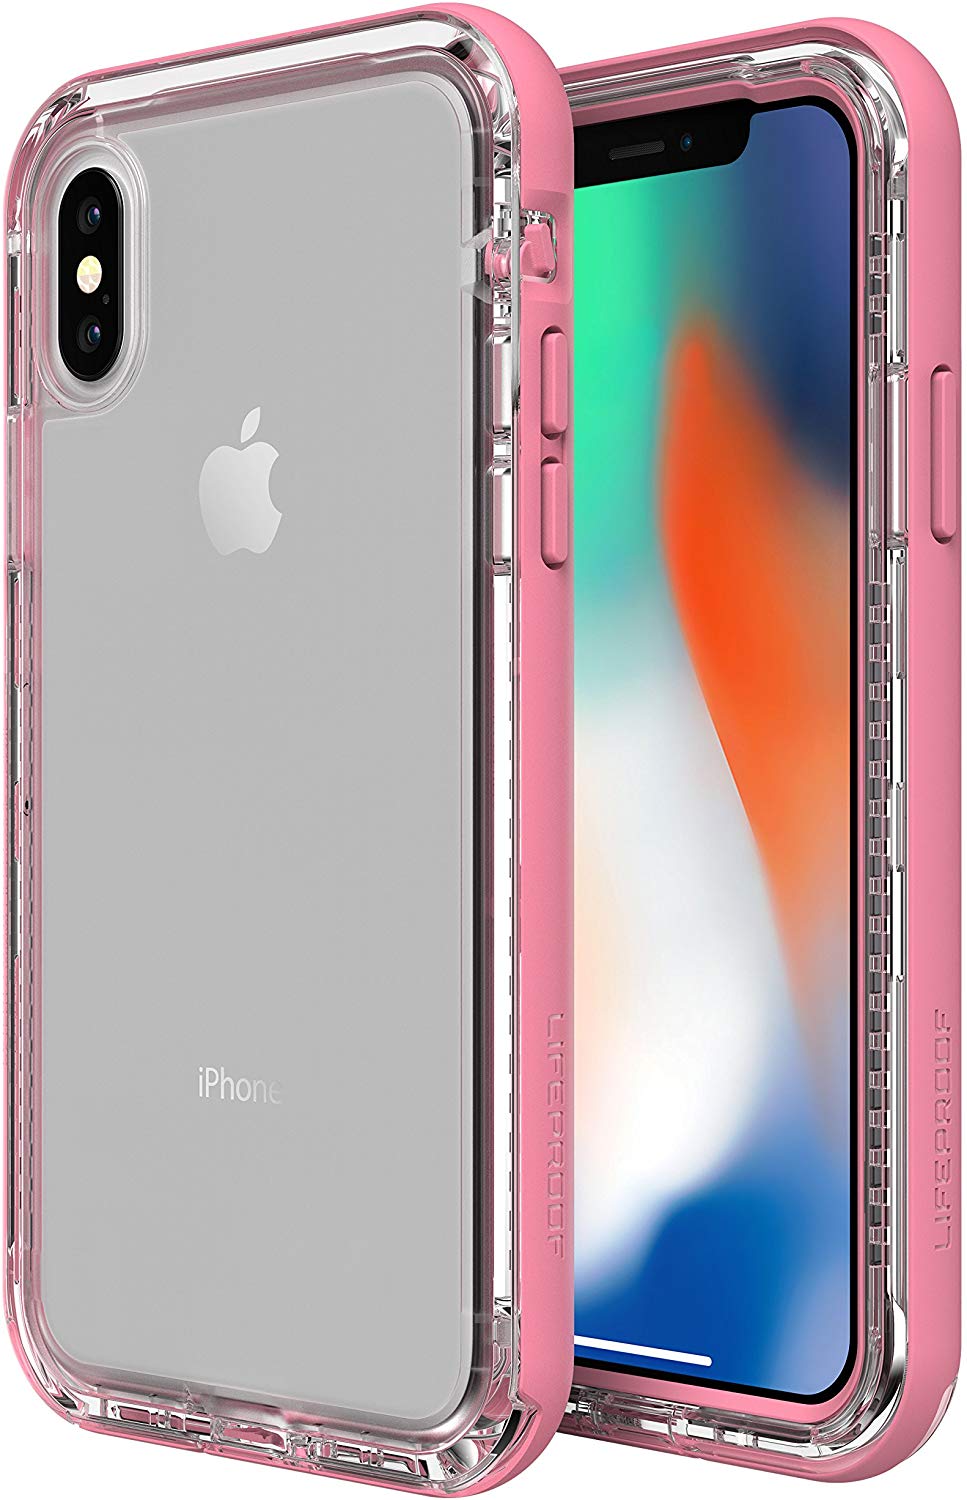 LifeProof NEXT SERIES Case for iPhone XS MAX (ONLY) - Cactus Rose (Certified Refurbished)